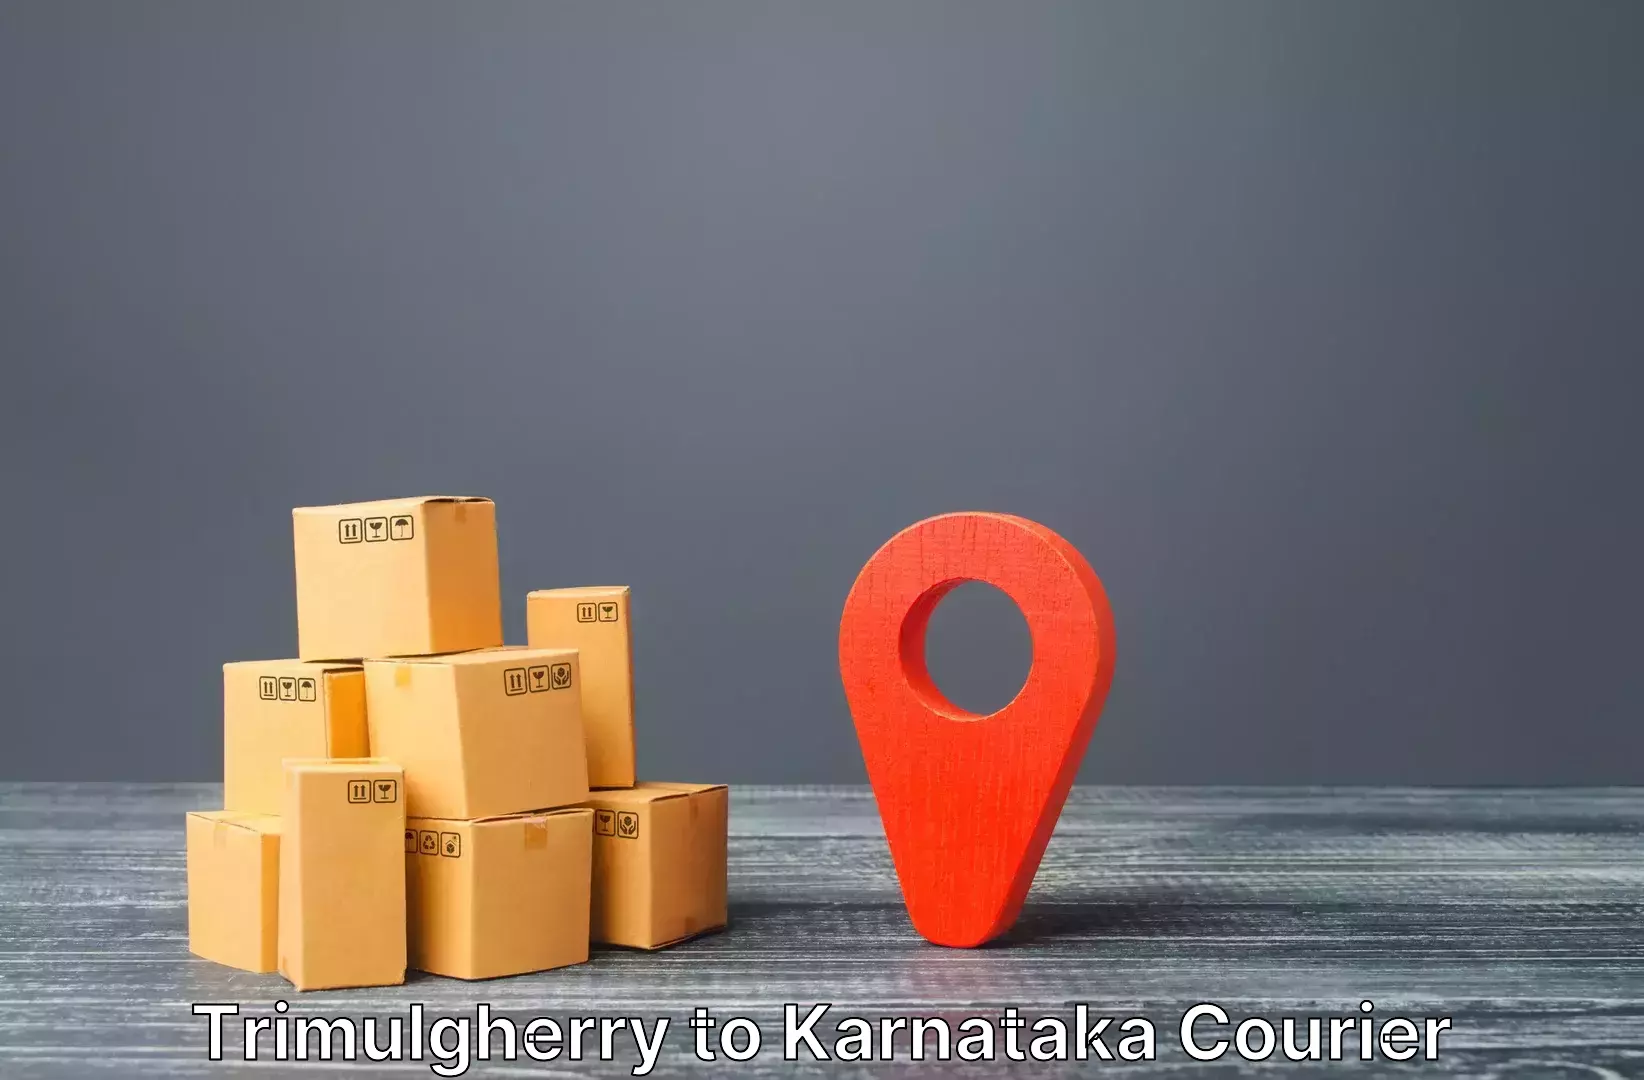 Online luggage shipping booking Trimulgherry to Kolar